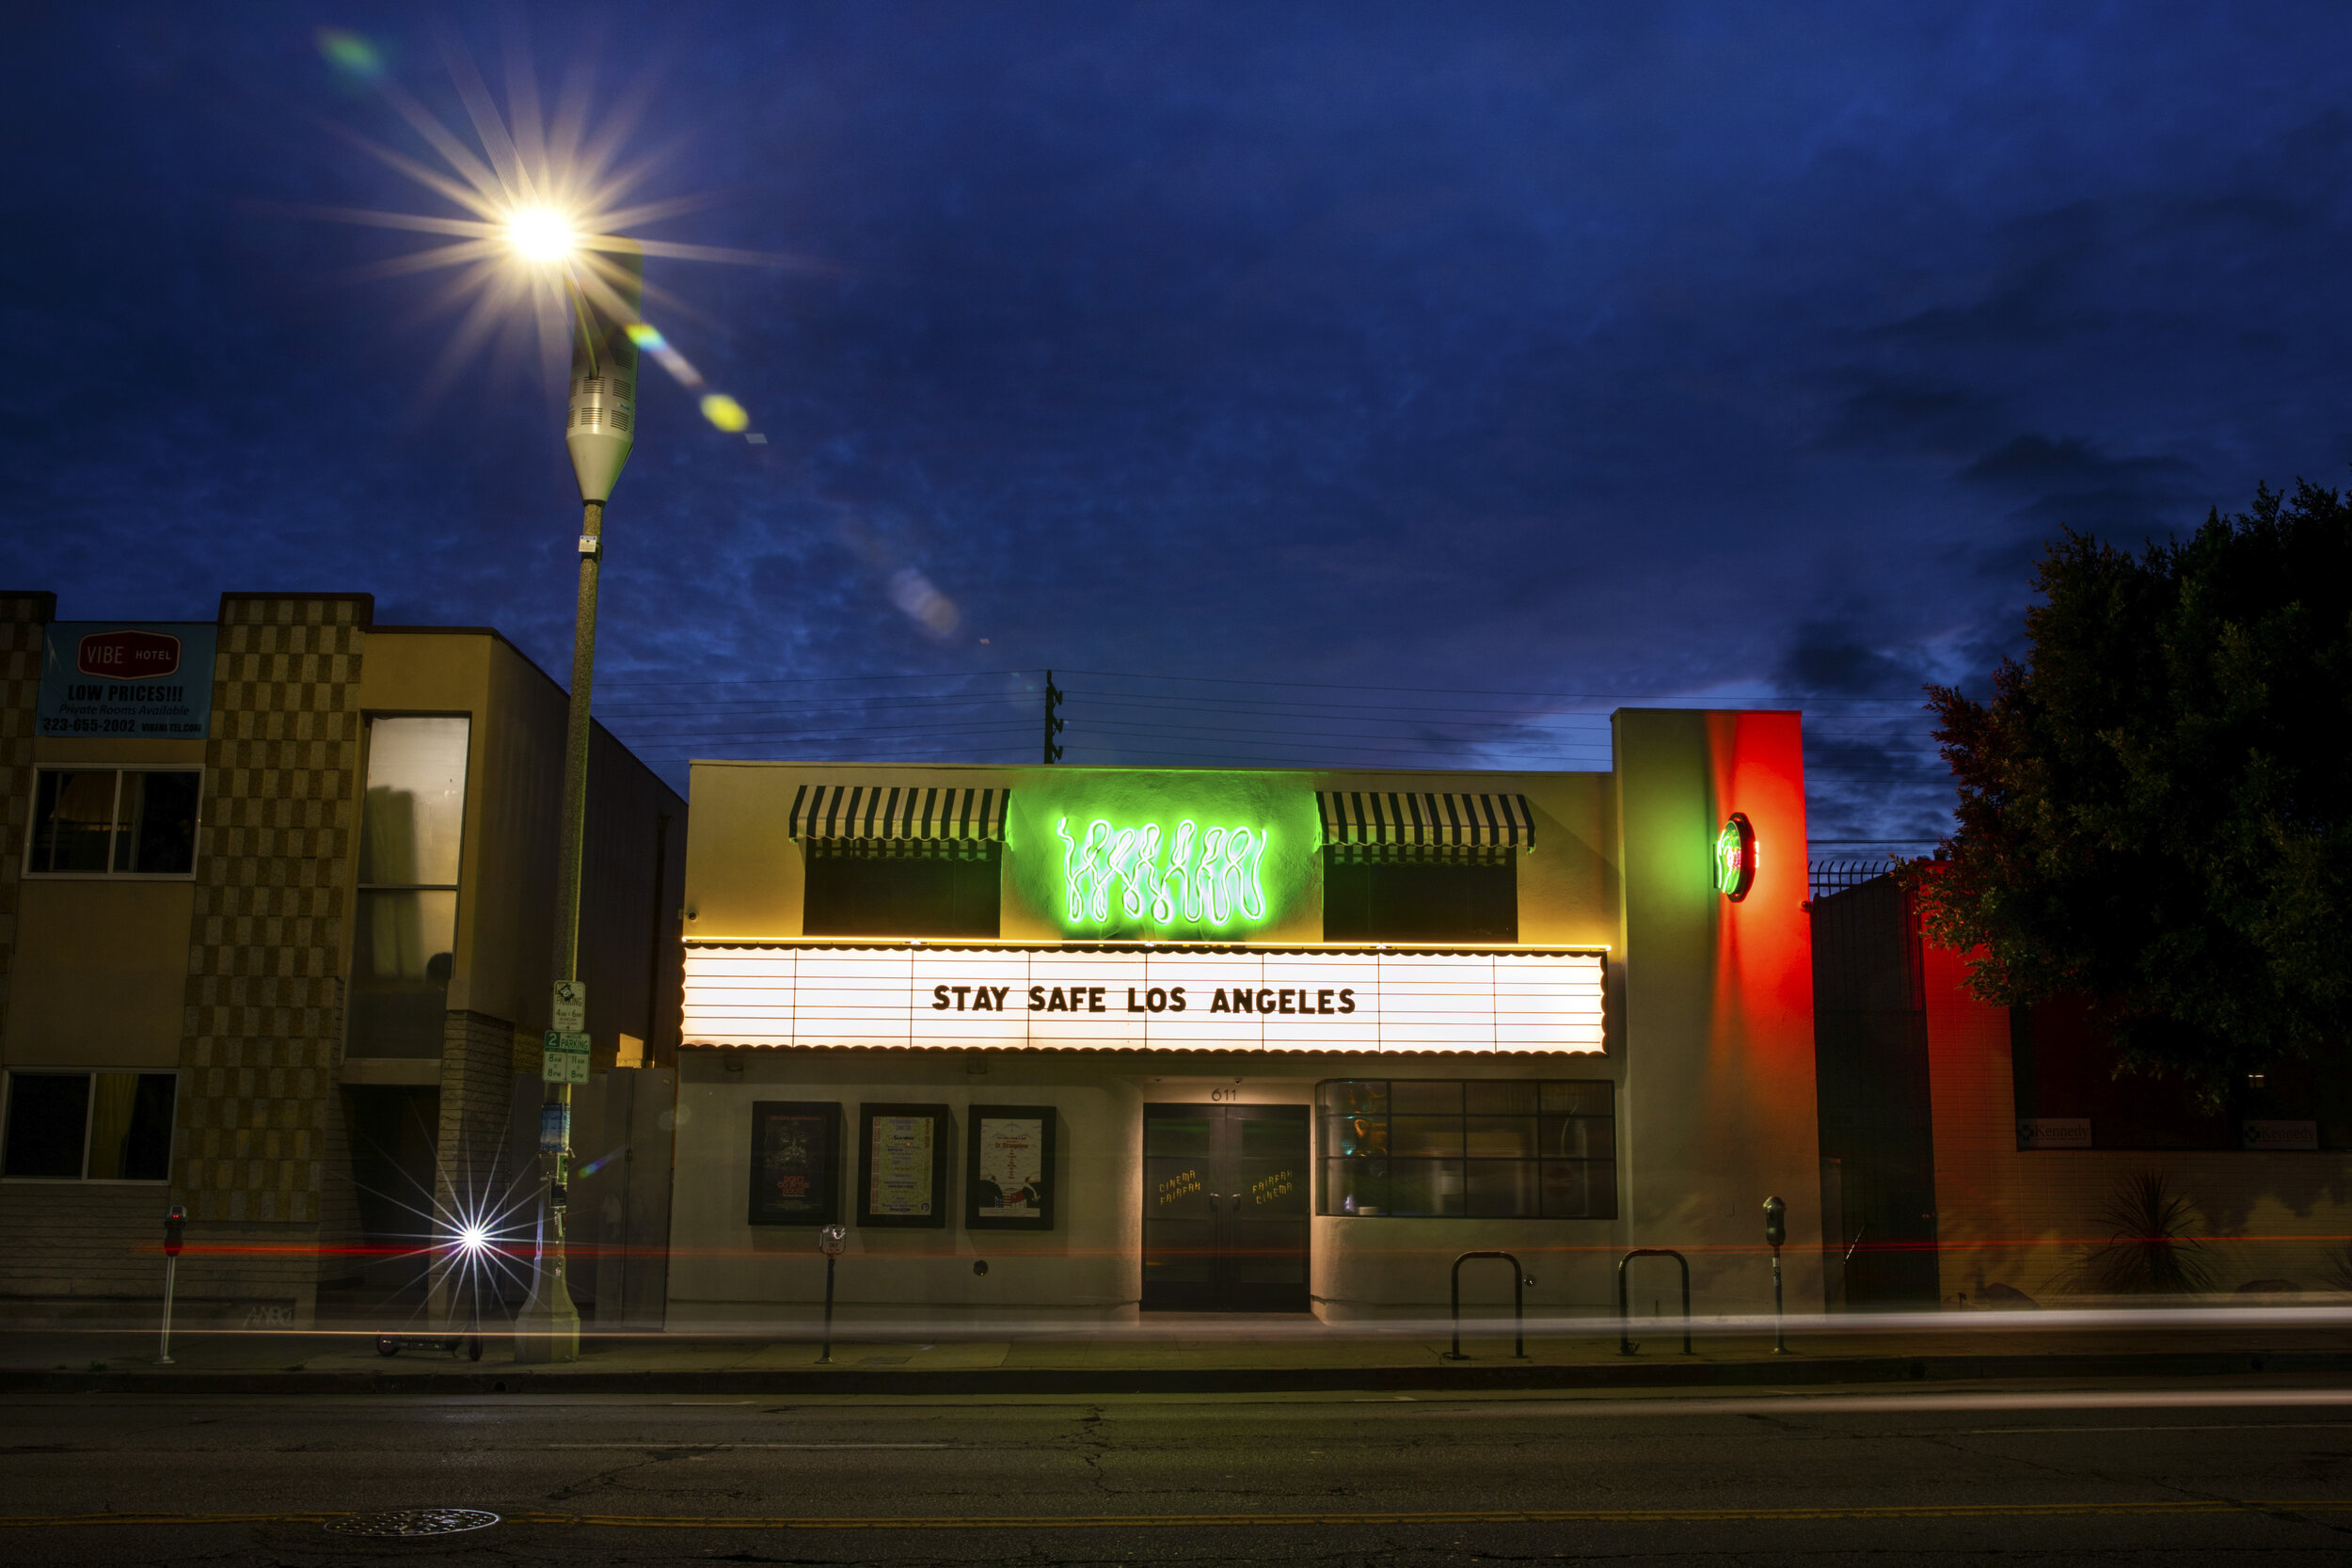  The Fairfax Cinema in Los Angeles, CA, is closed and left the message, “Stay Safe Los Angeles,” on its marquee, during the coronavirus pandemic, photographed Sunday, April 19, 2020. 